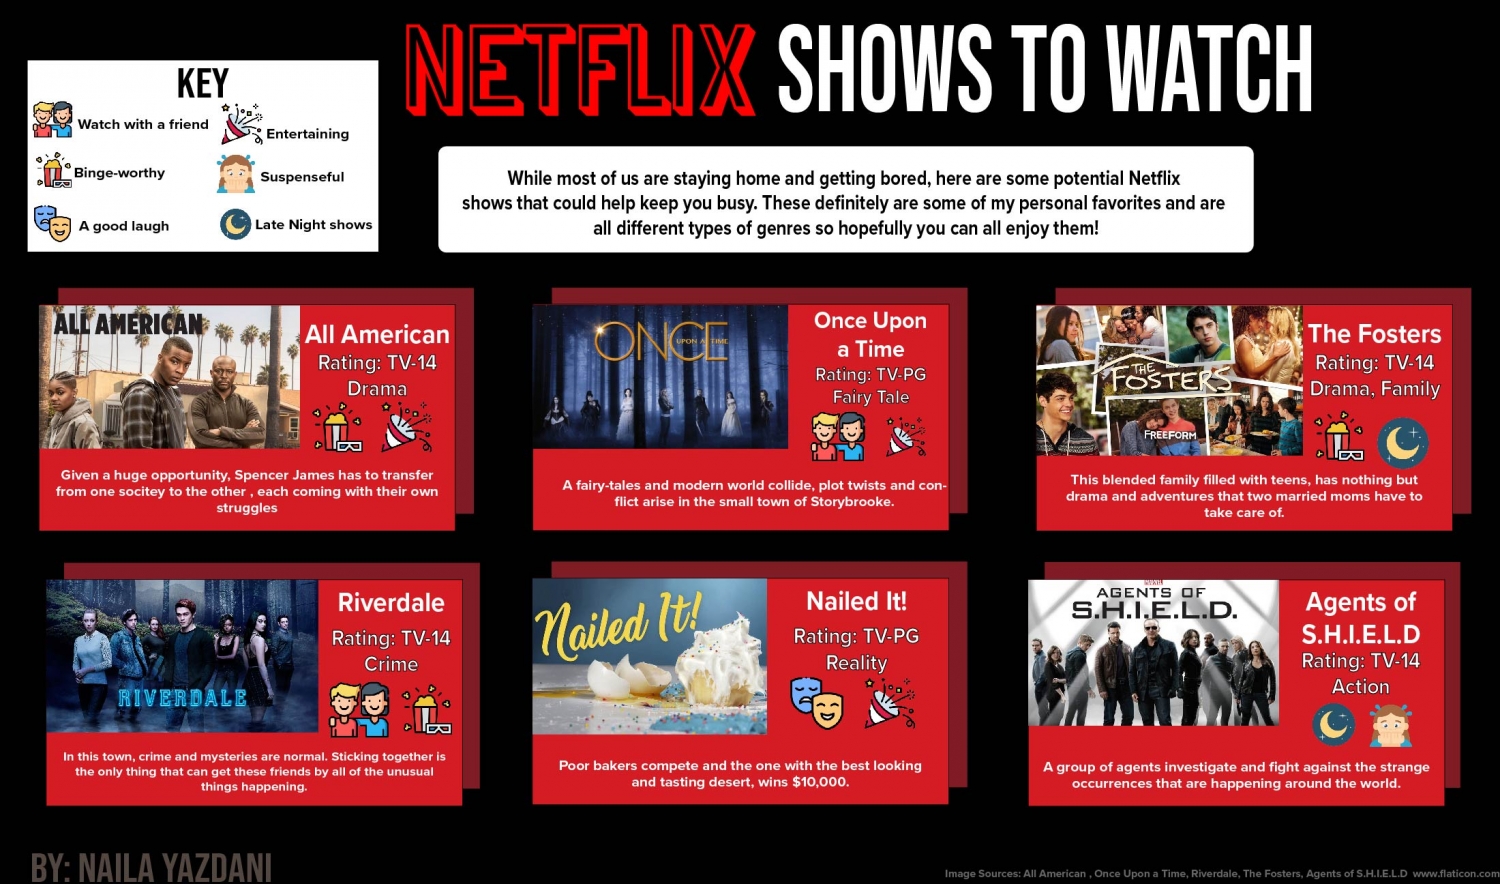 INFOGRAPHIC: Netflix shows to watch